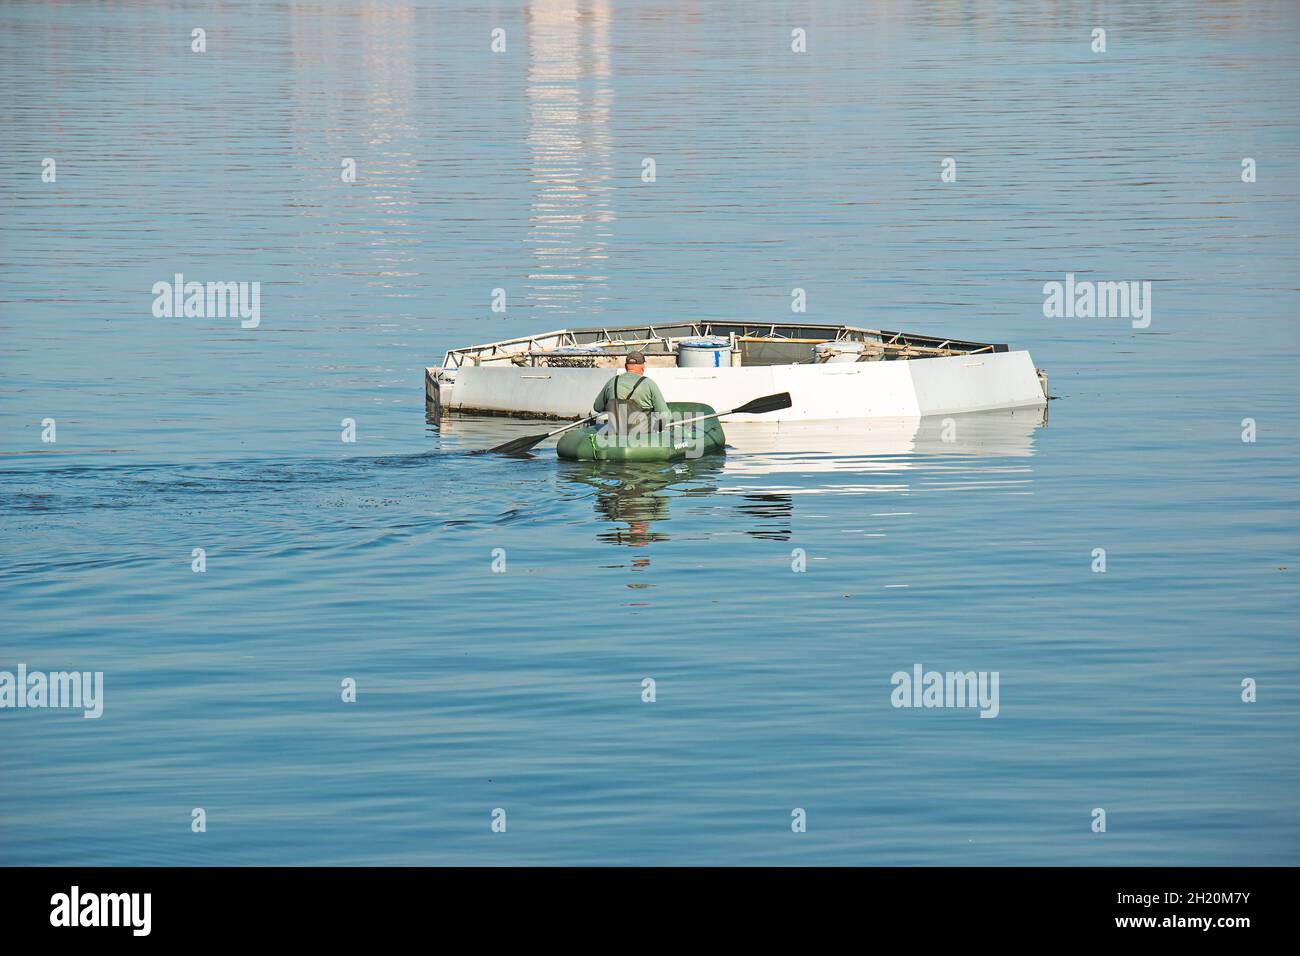 Dnepropetrovsk, Ukraine - 10.15.2021: Maintenance works of the city fountain. A municipal service worker delivers a tool for working on a rubber boat. Stock Photo